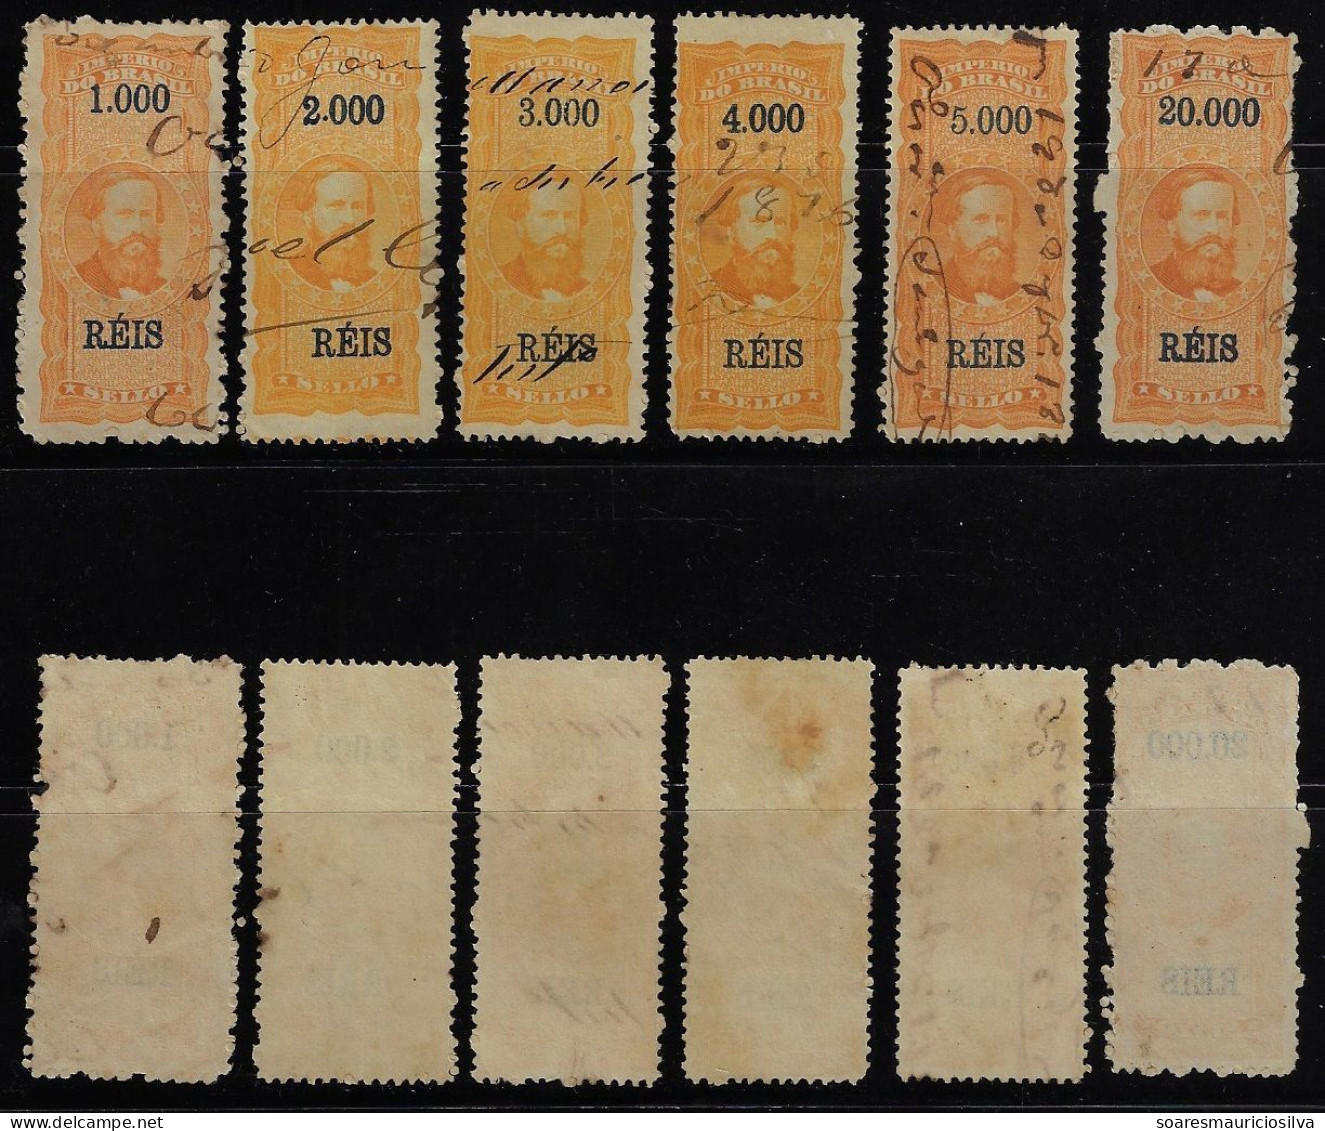 Brazil Year 1869 Fiscal Revenue Stamp Emperor Pedro II 1$ 2$ 3$ 4$ 5$ 20$ With Thousand Dot & White Paper Used - Used Stamps